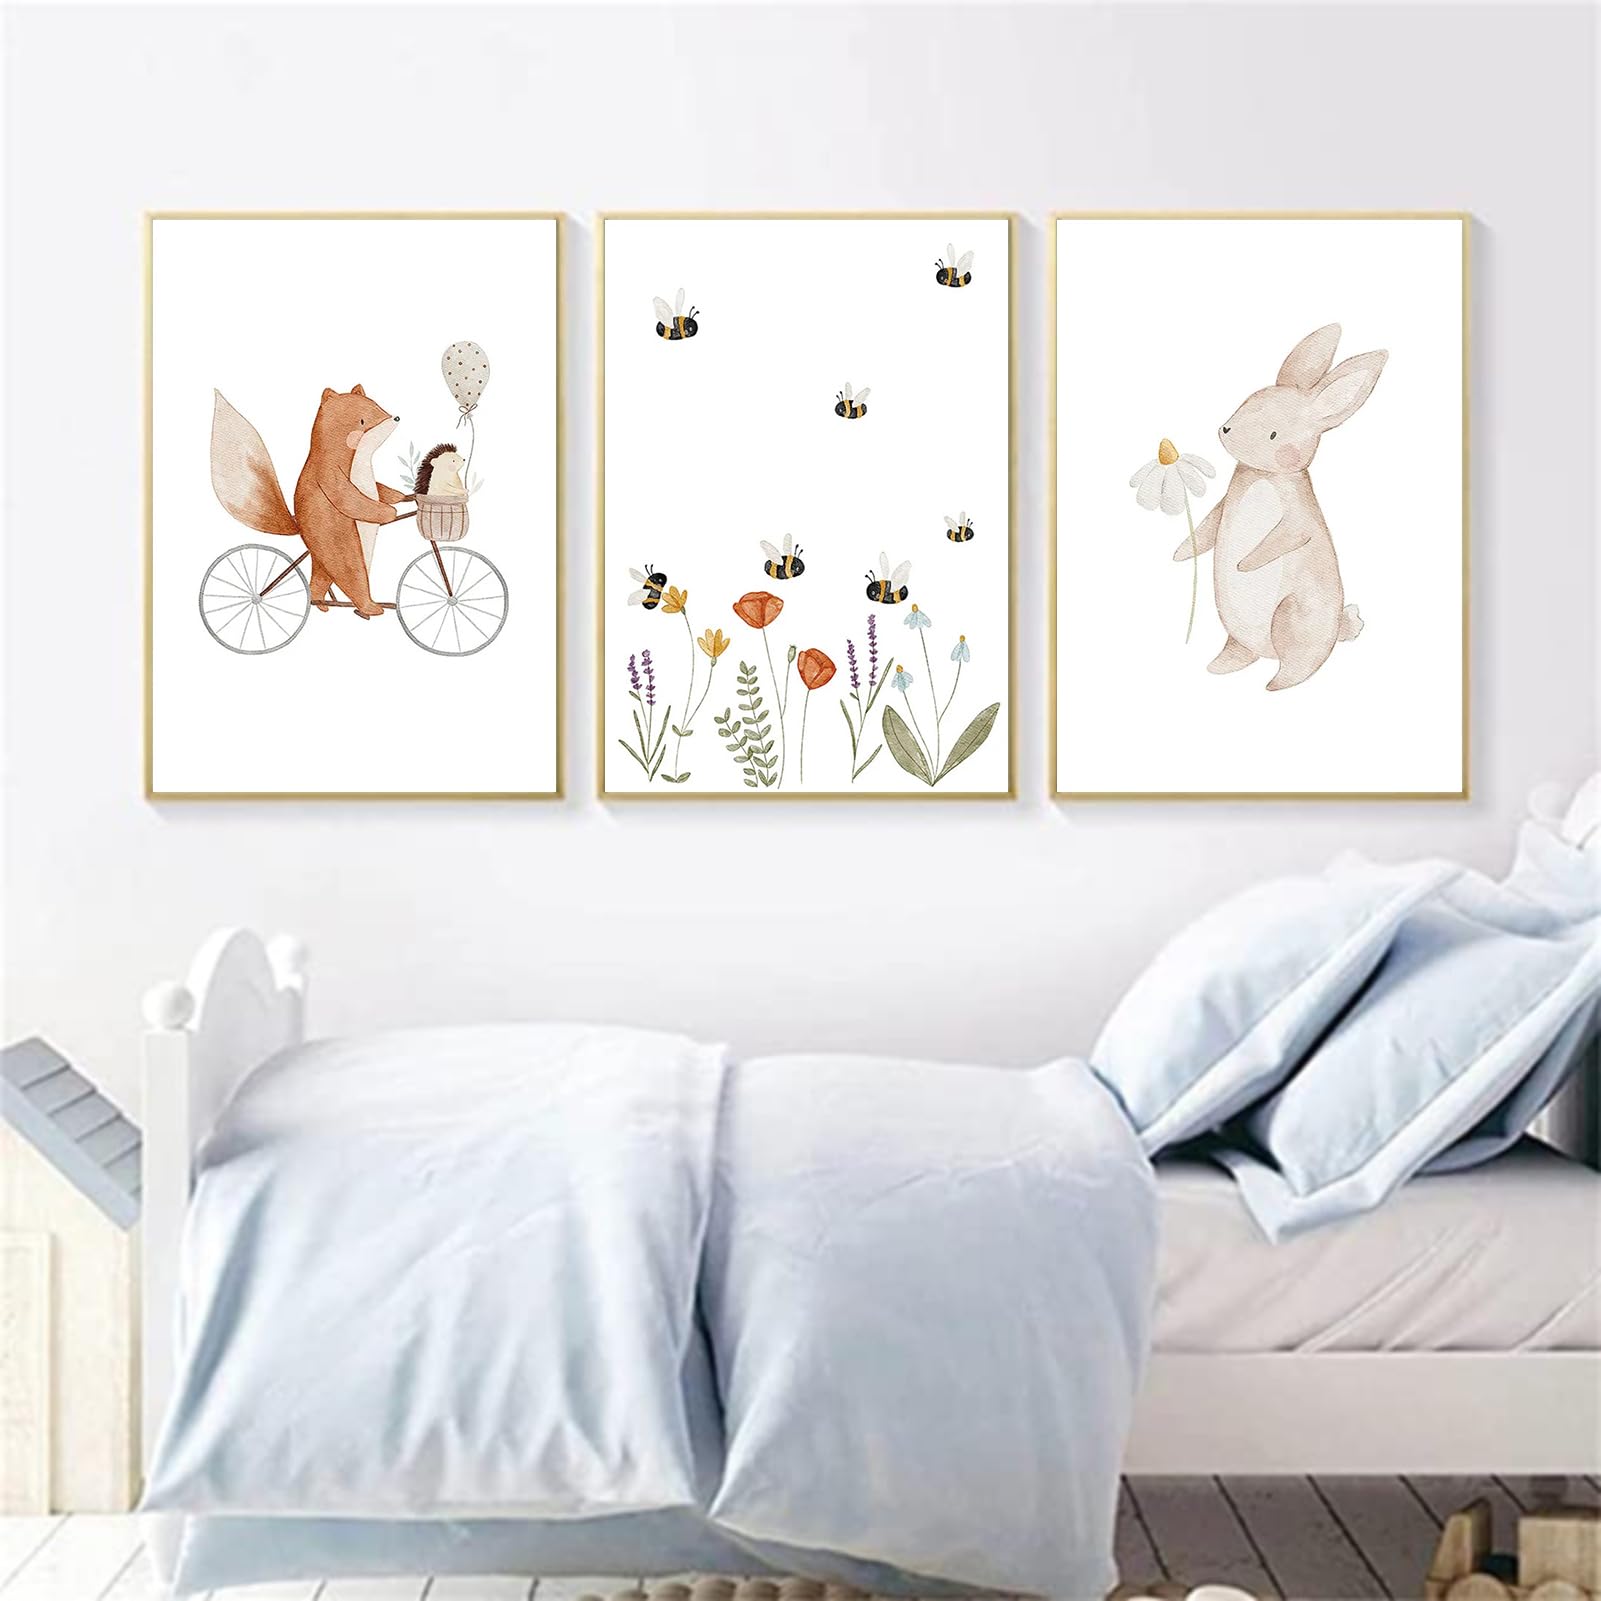 EXQUILEG 3-Piece Premium Poster Set,Osterhase Aesthetic Wall Pictures, Beige Canvas Pictures Without Frame, Modern Pictures, Wall Decoration for Living Room, Canvas Art Poster (50x70cm)